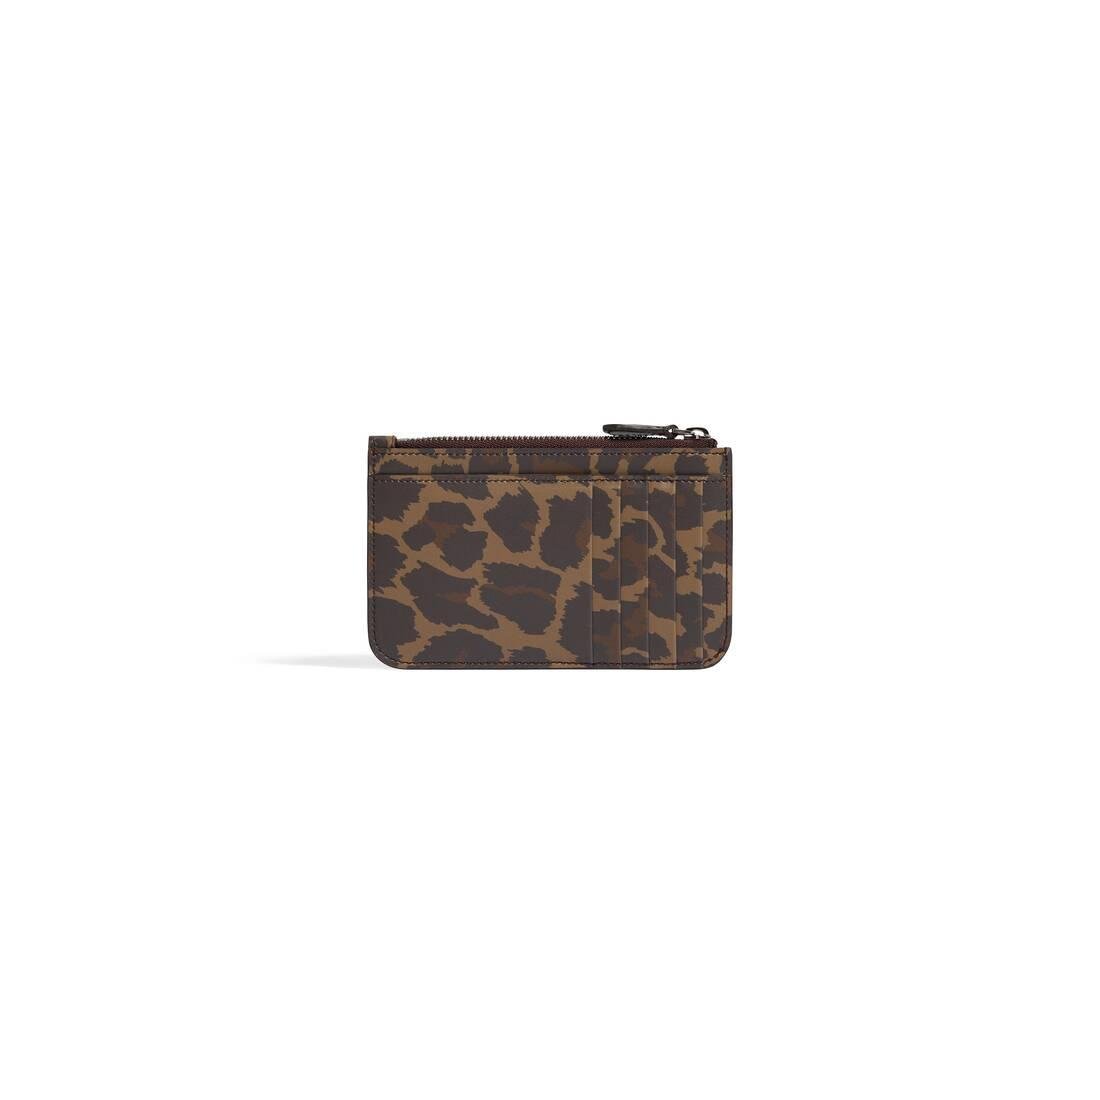 Balenciaga Cash Large Long Coin And Card Holder With Leopard Print